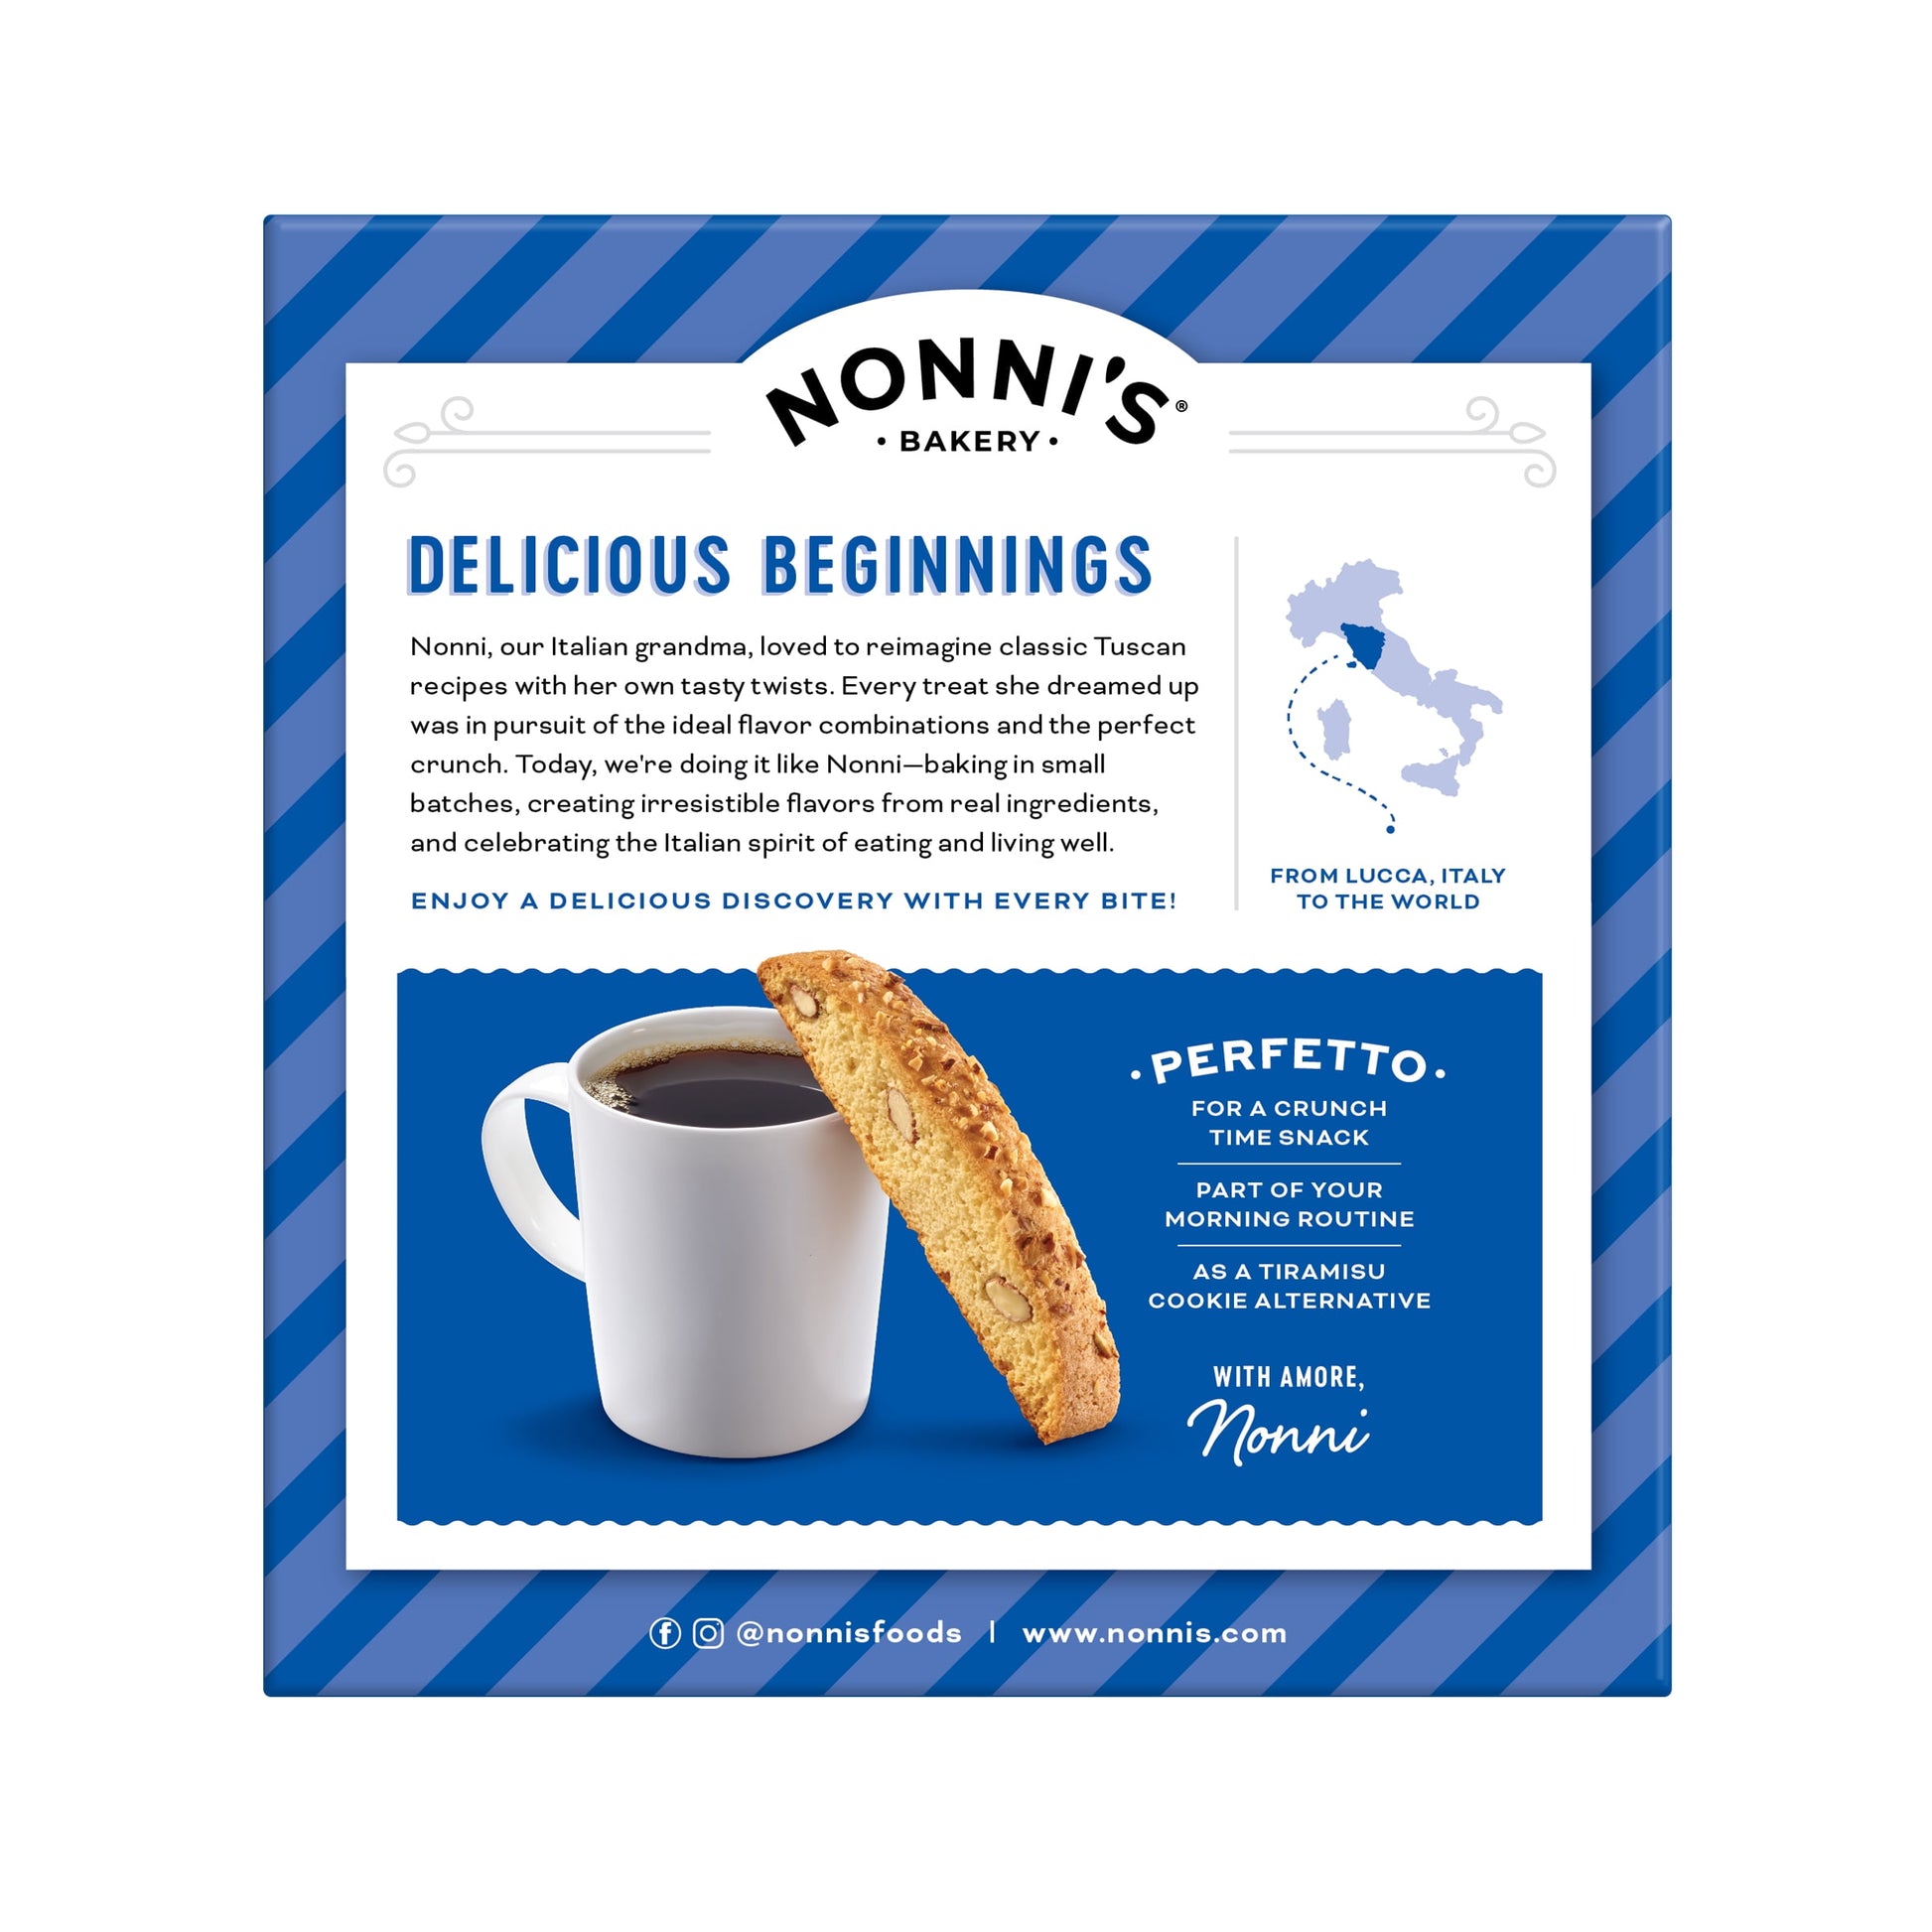 , Originali Biscotti, Almond Cookie, 5.52 Oz (156G), 8 Ct, Individually Wrapped & Ready to Eat